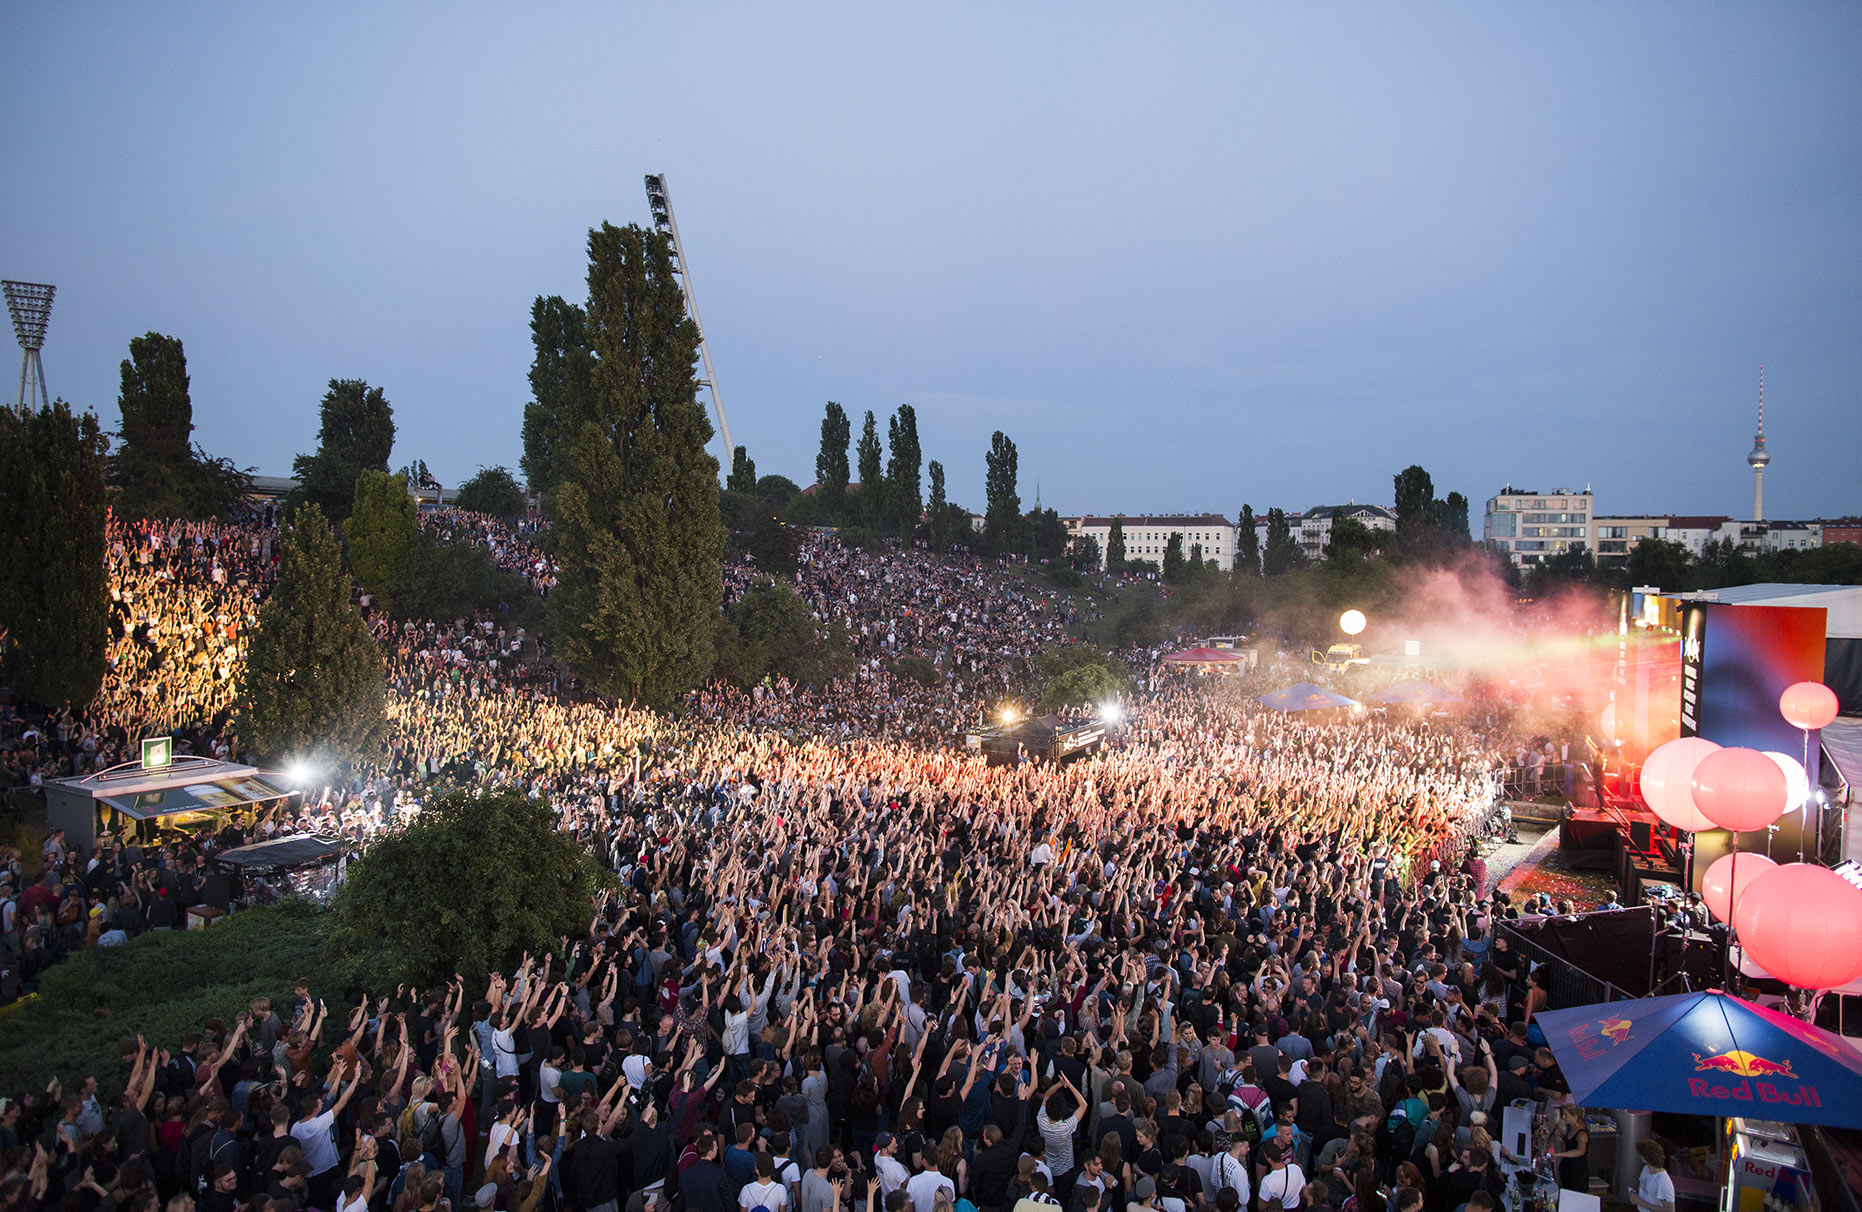 © Dirk Mathesius, Red Bull Music Academy Stage at Mauerpark in Berlin